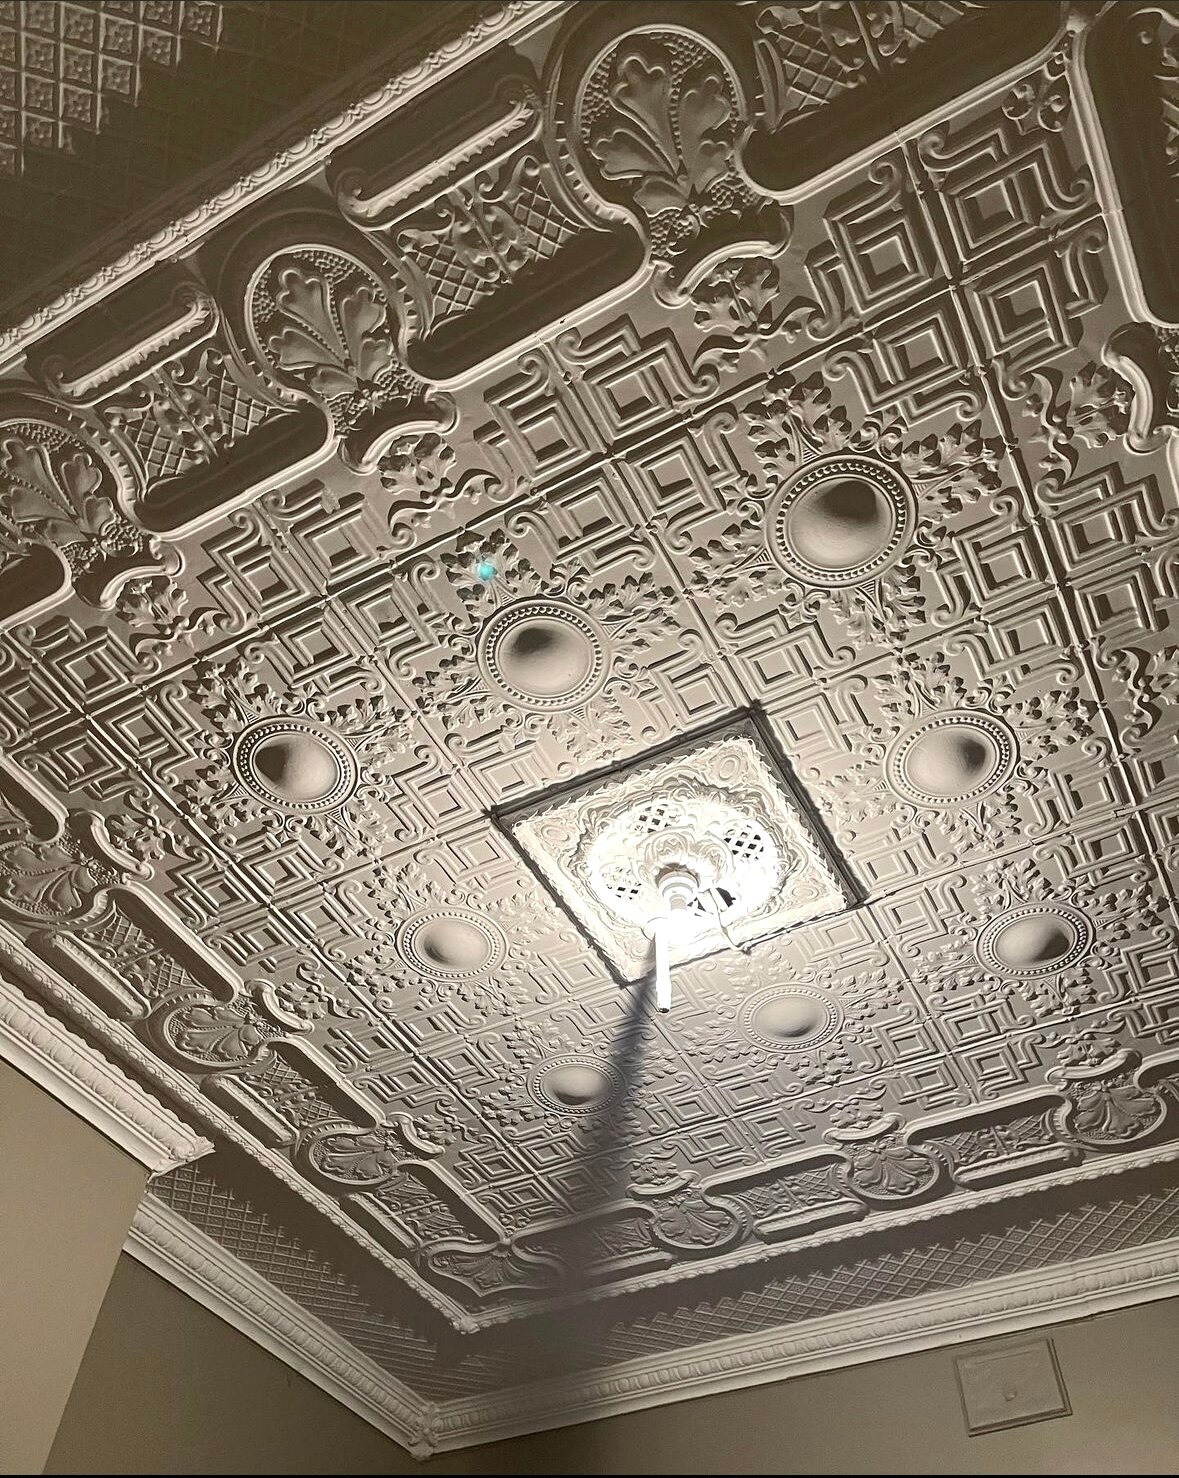 A ceiling with intricate raised designs surrounding the central light